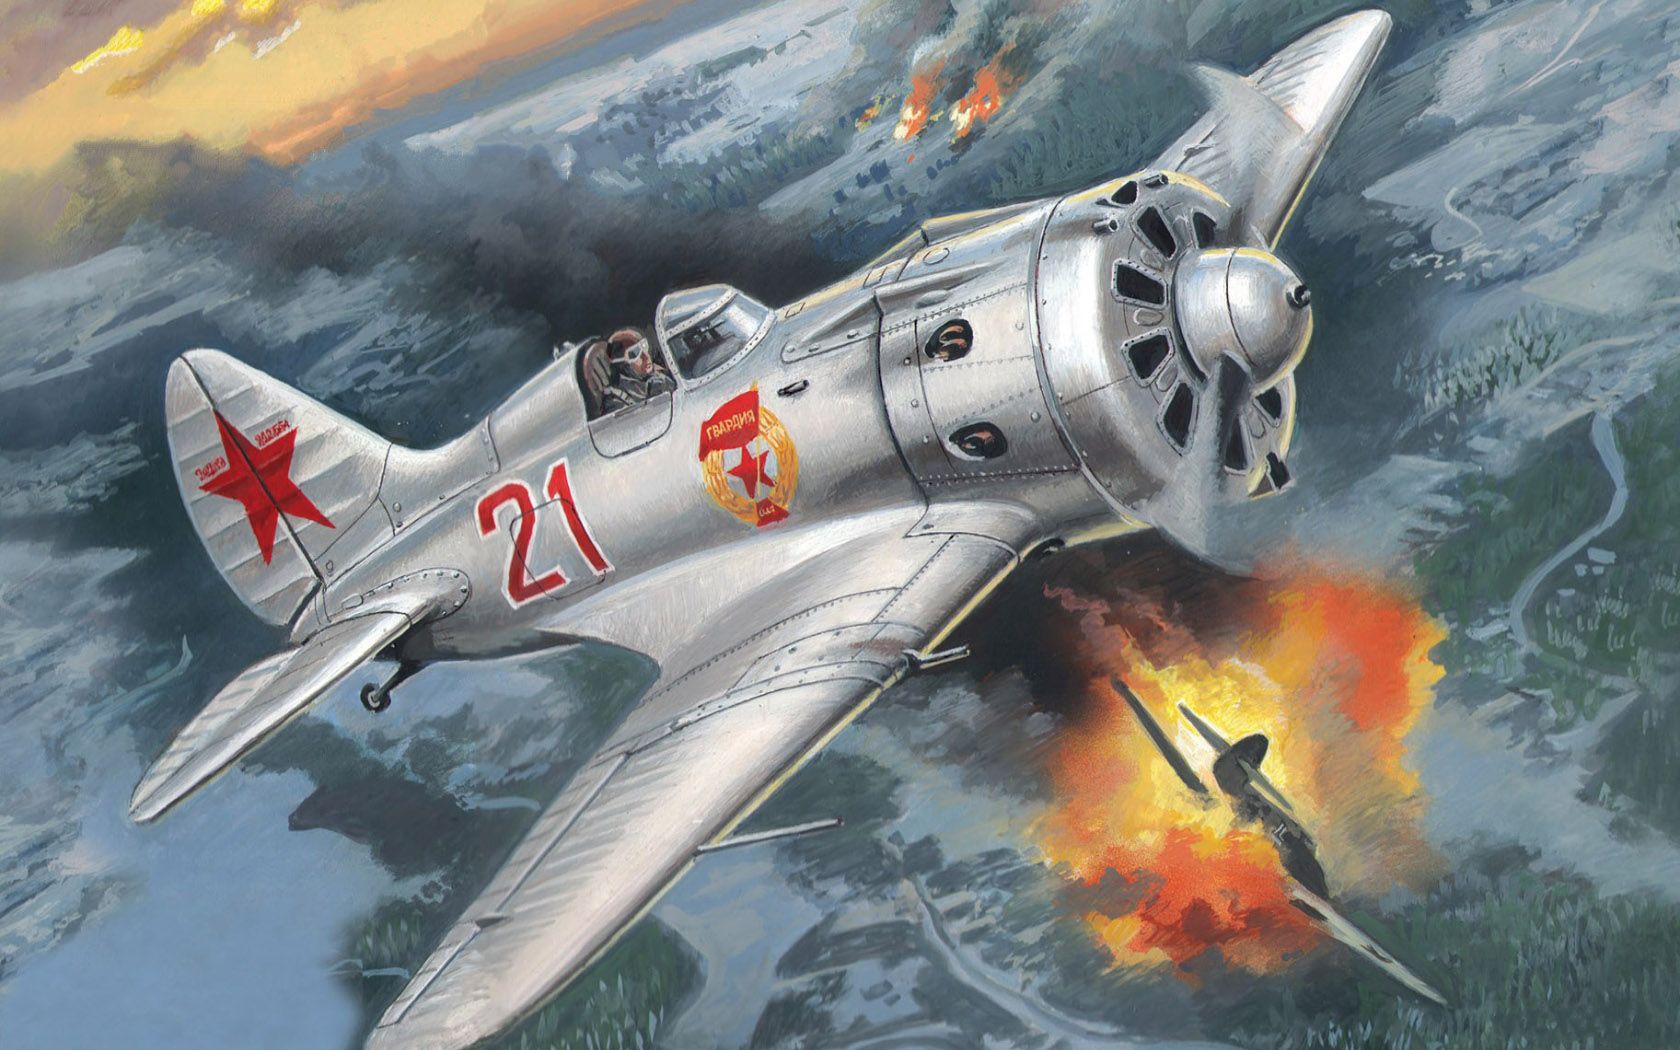 General 1680x1050 aircraft military Polikarpov I-16 military vehicle smoke explosion artwork flying sky dogfight Soviet Air Forces air force World War II Boxart